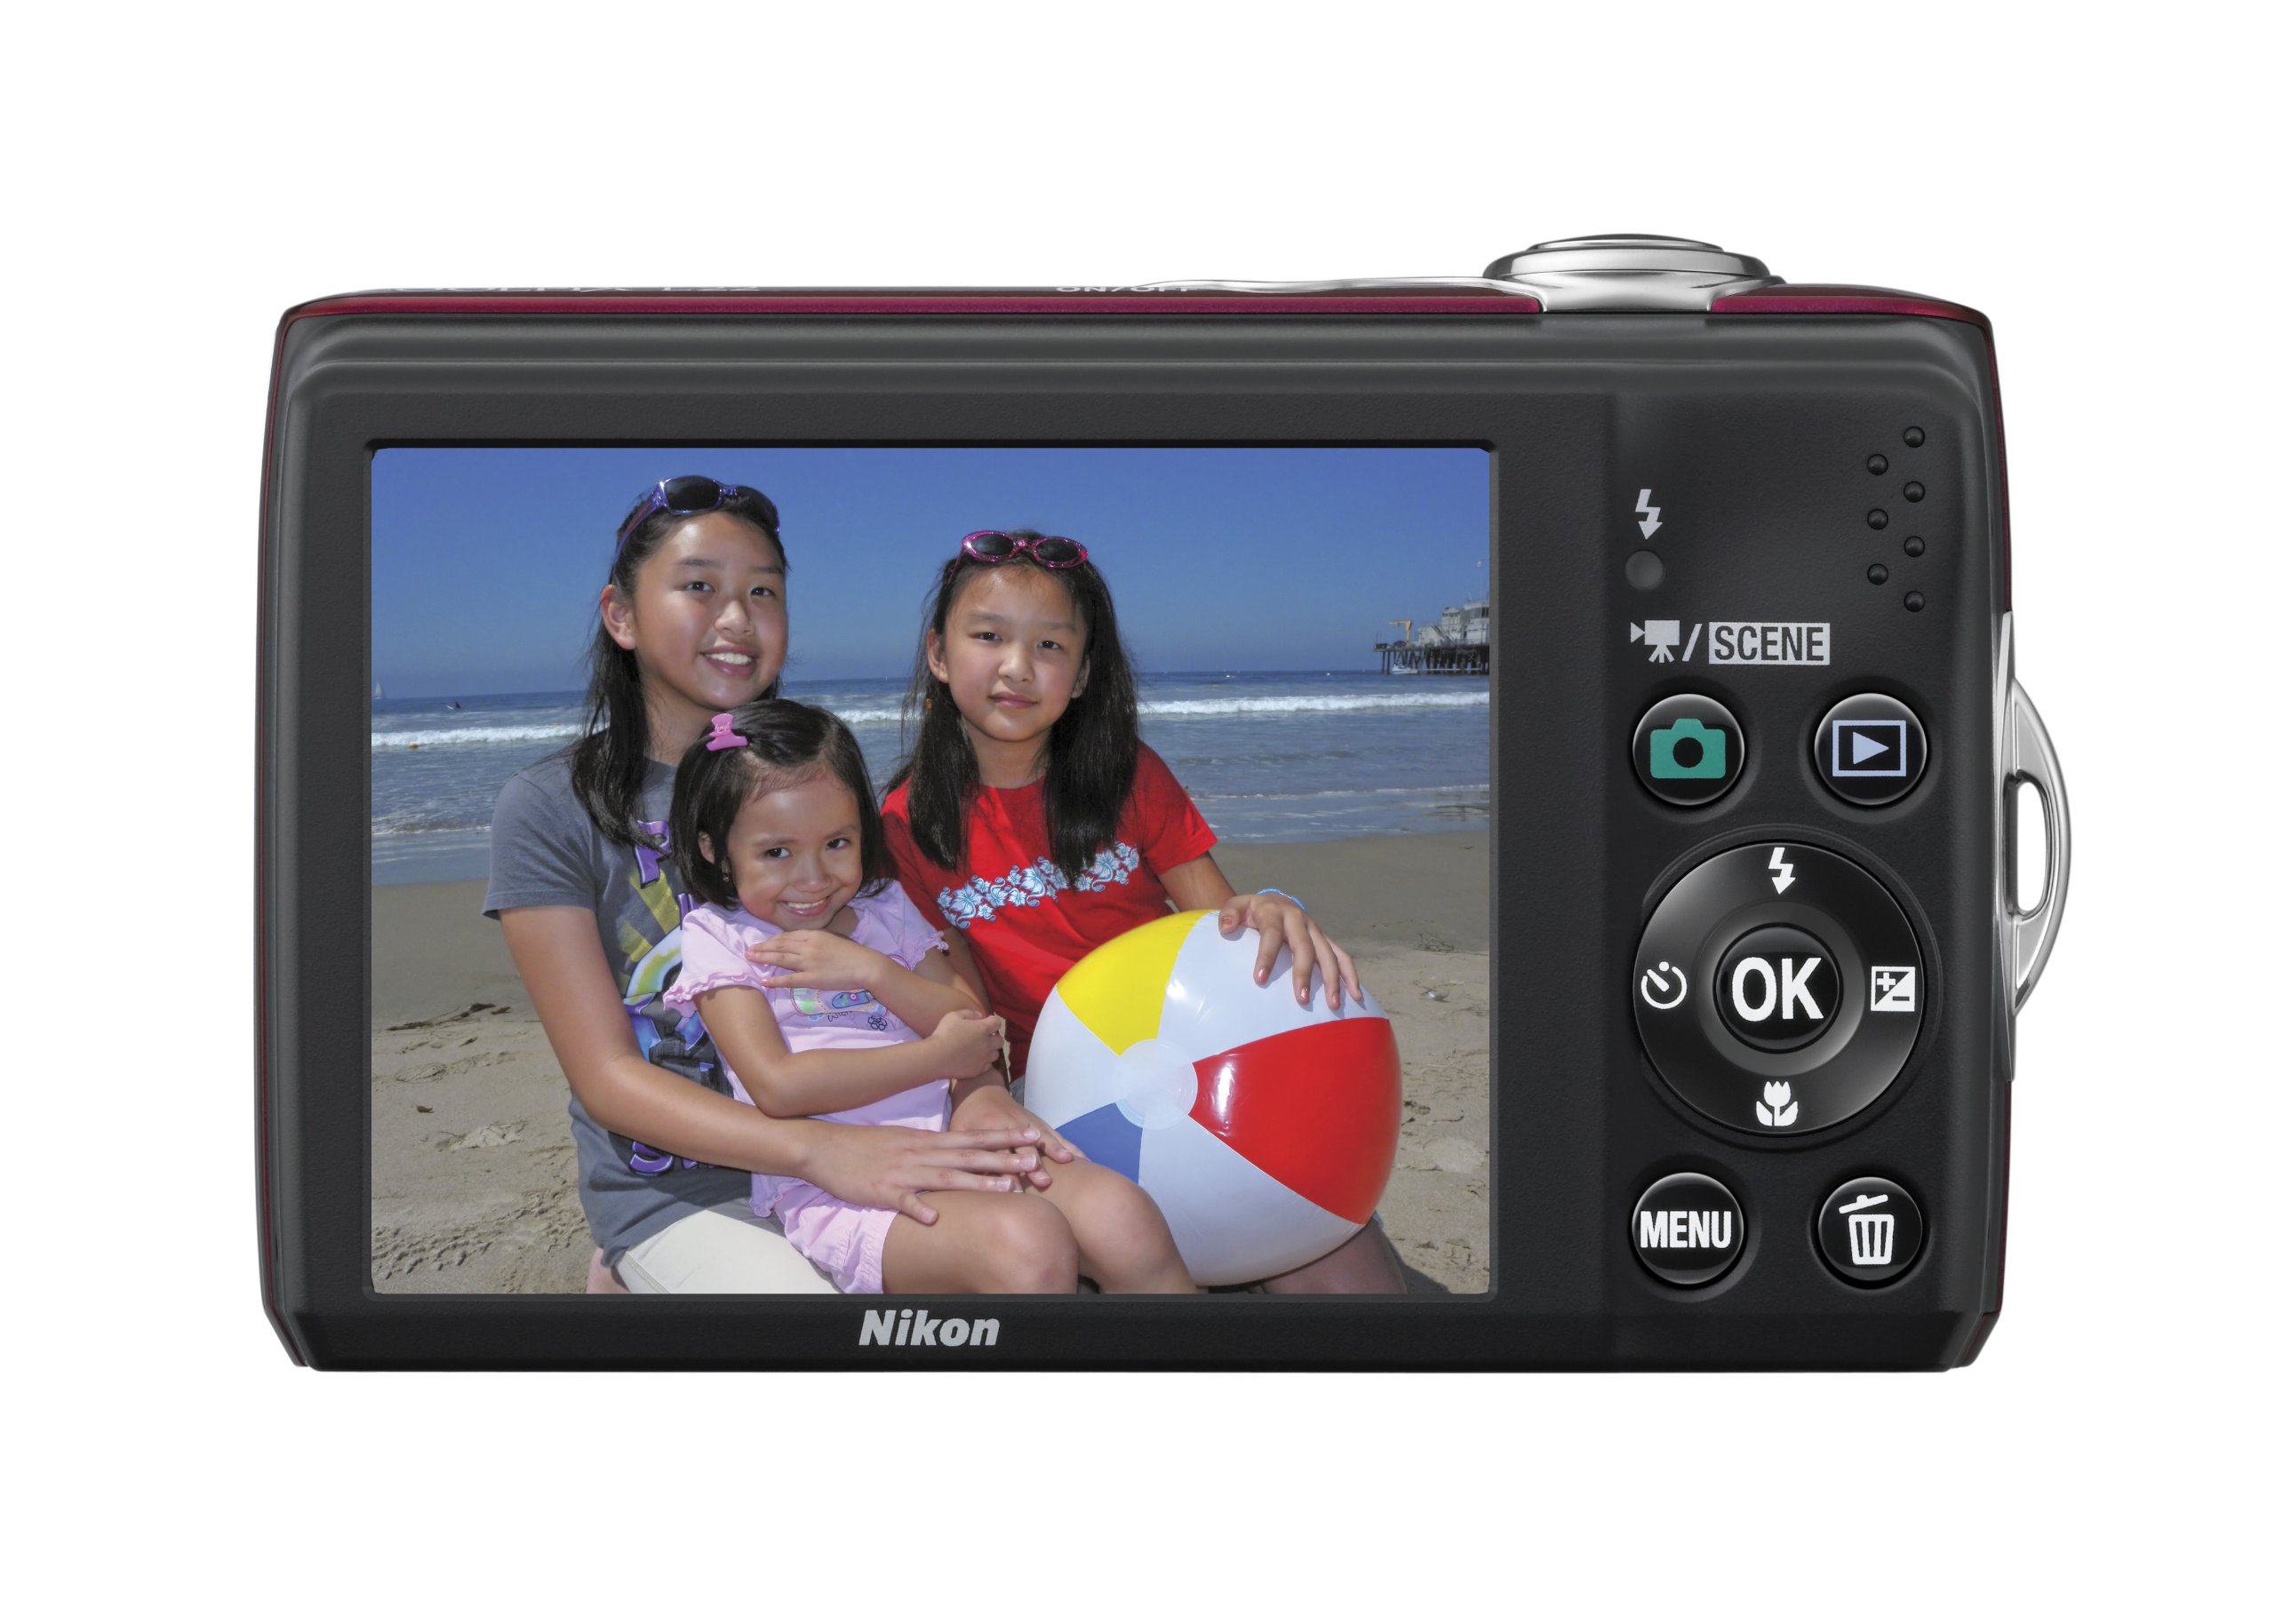 Nikon Coolpix L22 12.0MP Digital Camera with 3.6x Optical Zoom and 3.0-Inch LCD (Red-primary)